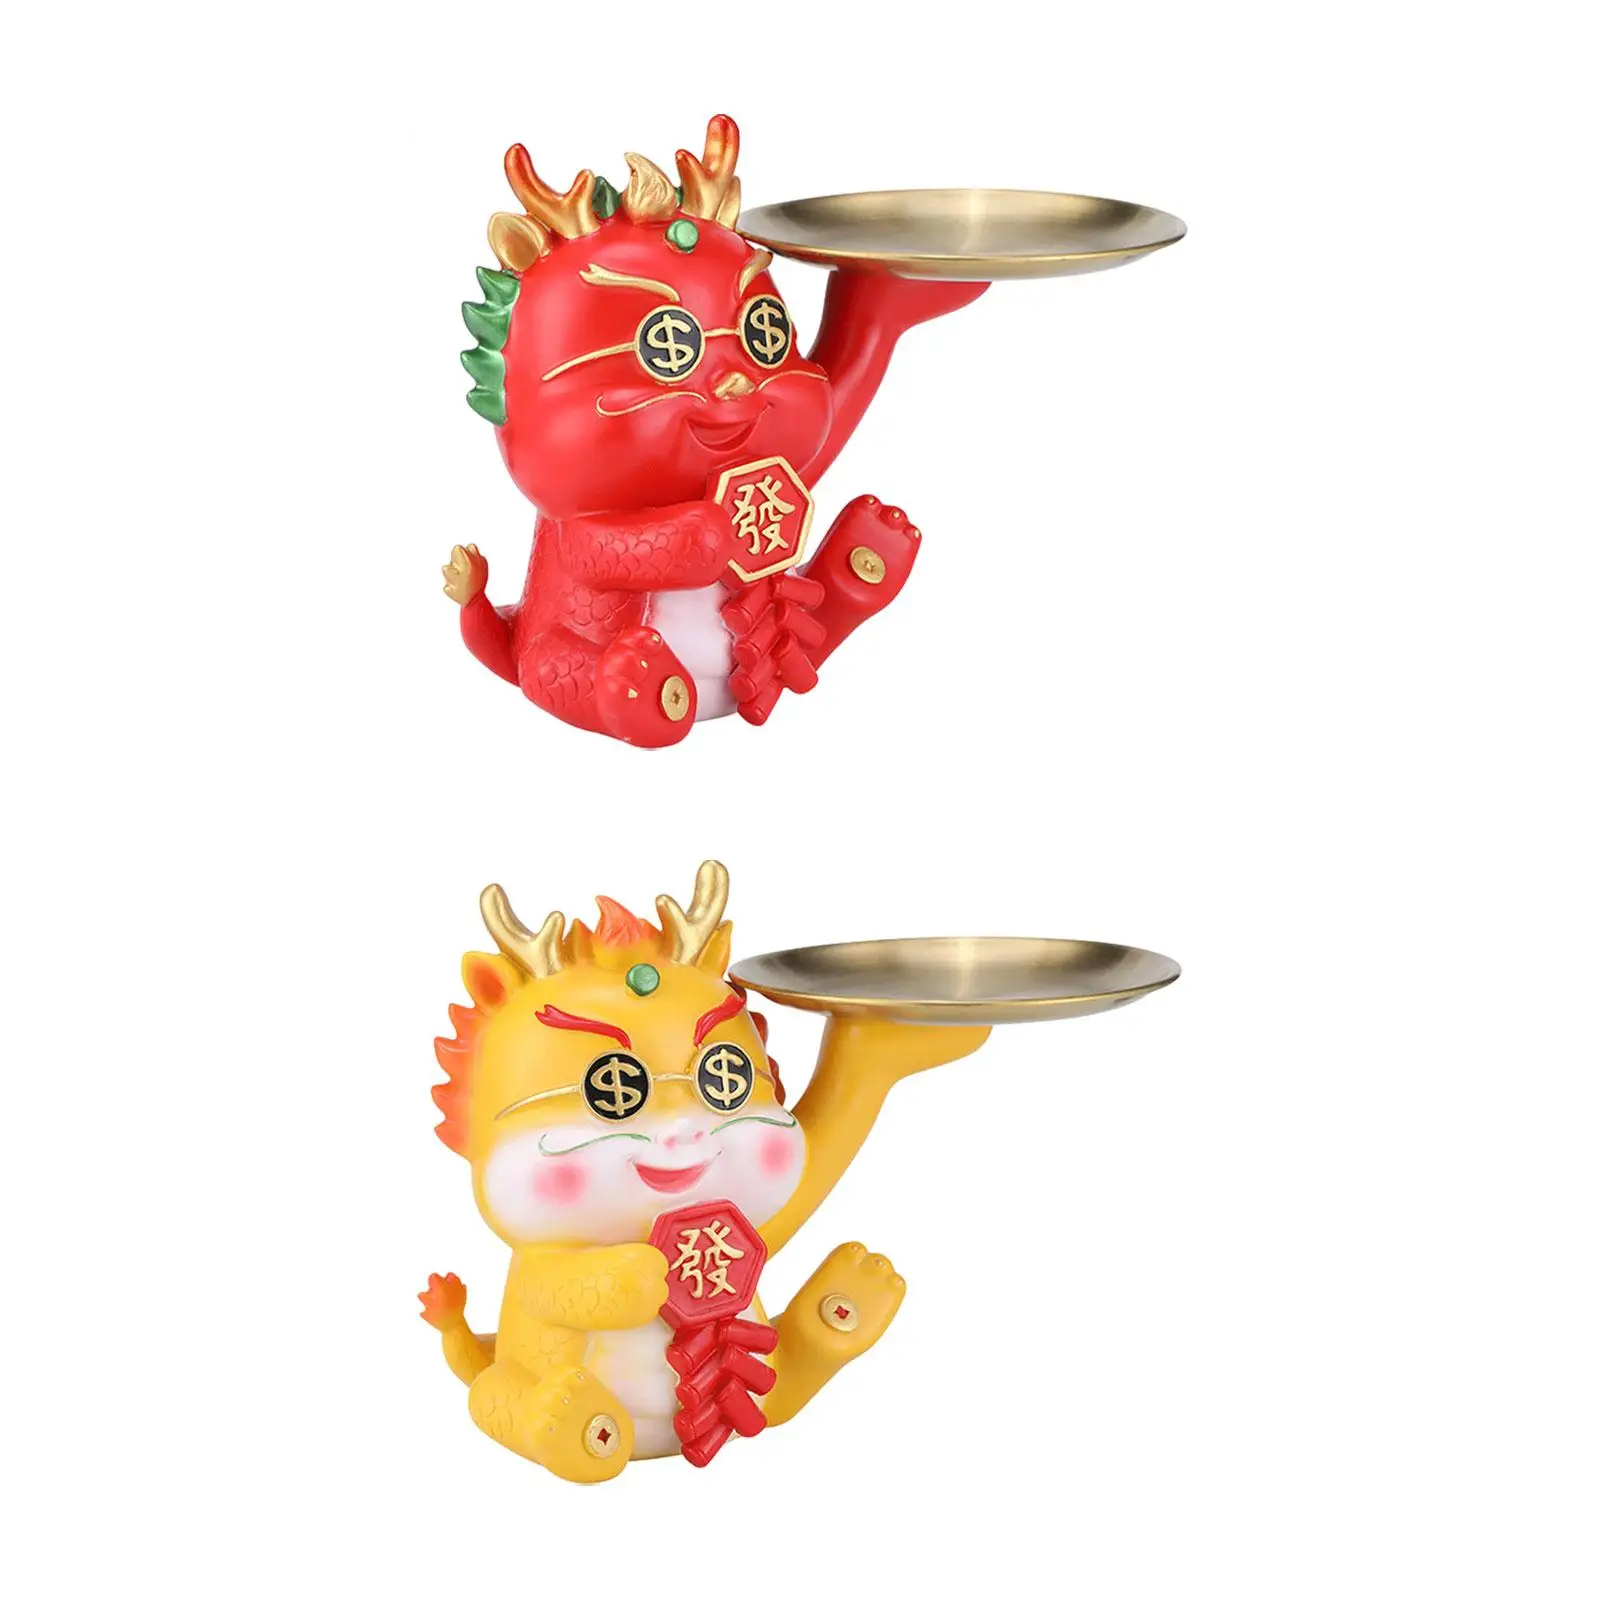 Dragon Statue Multifunctional Sundries Container Tabletop Ornament Piggy Bank for Cabinet Living Room Desktop Shelf Home